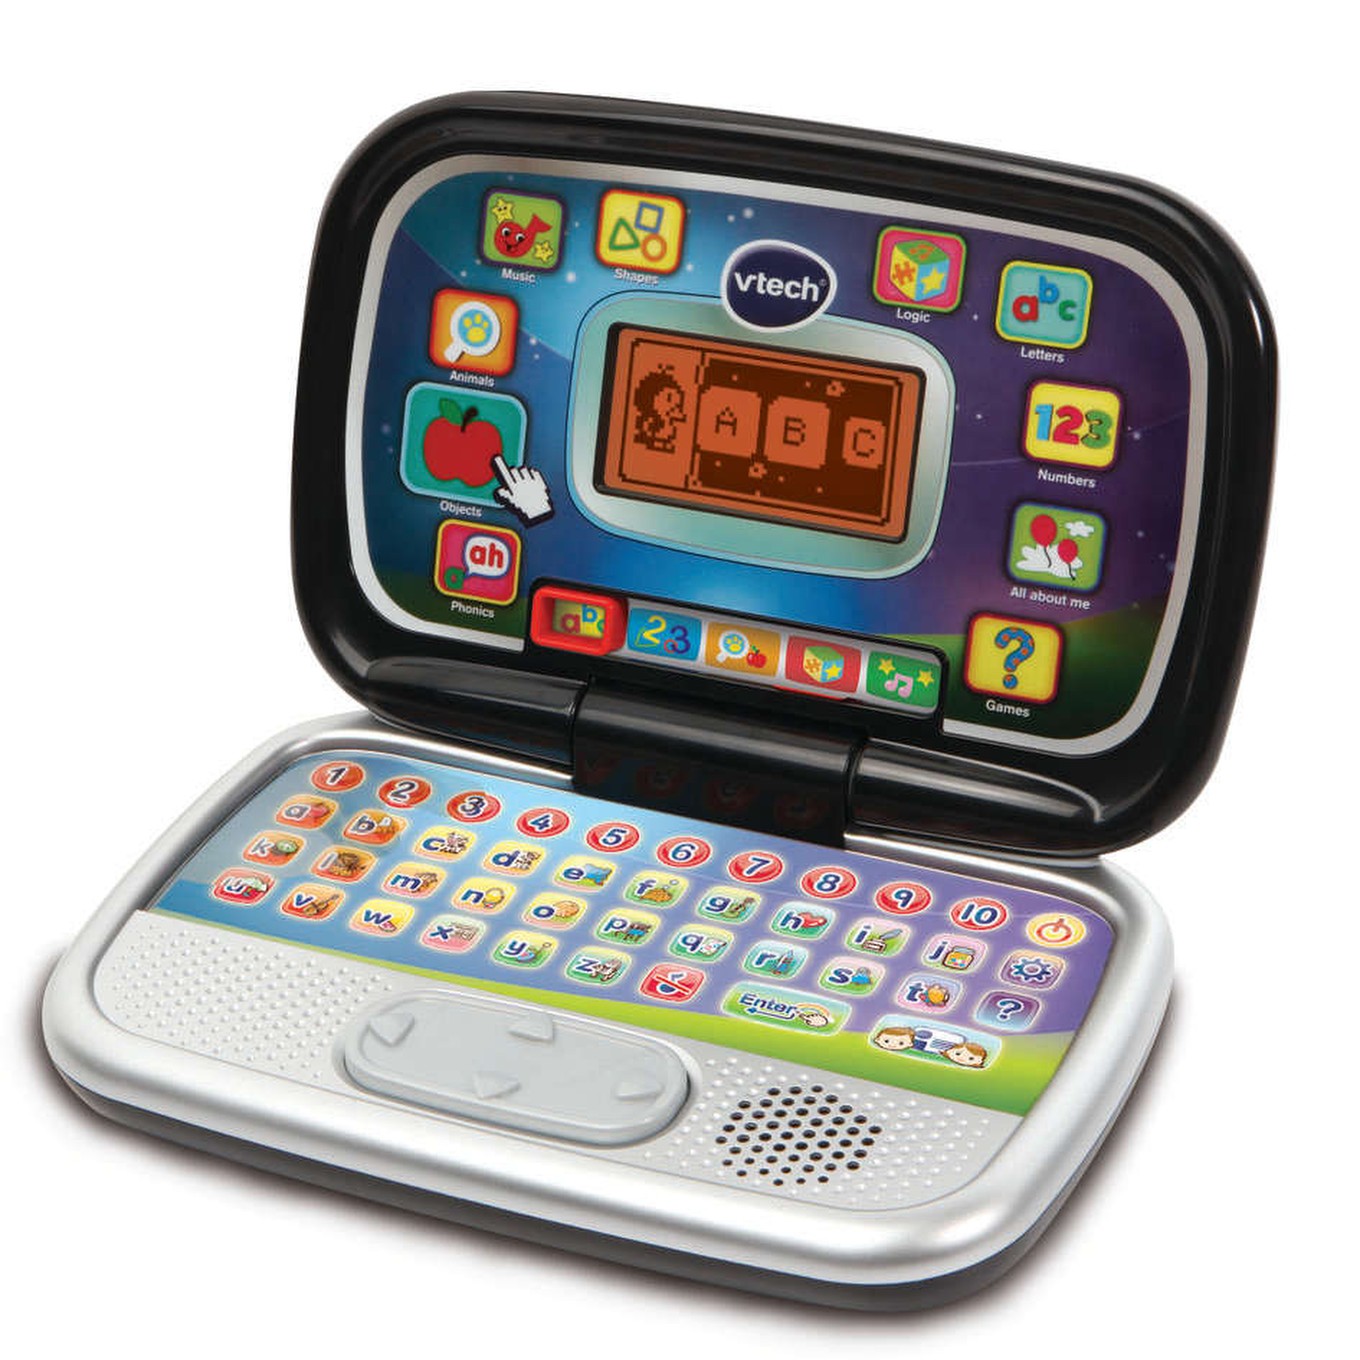 vtech computer for toddlers